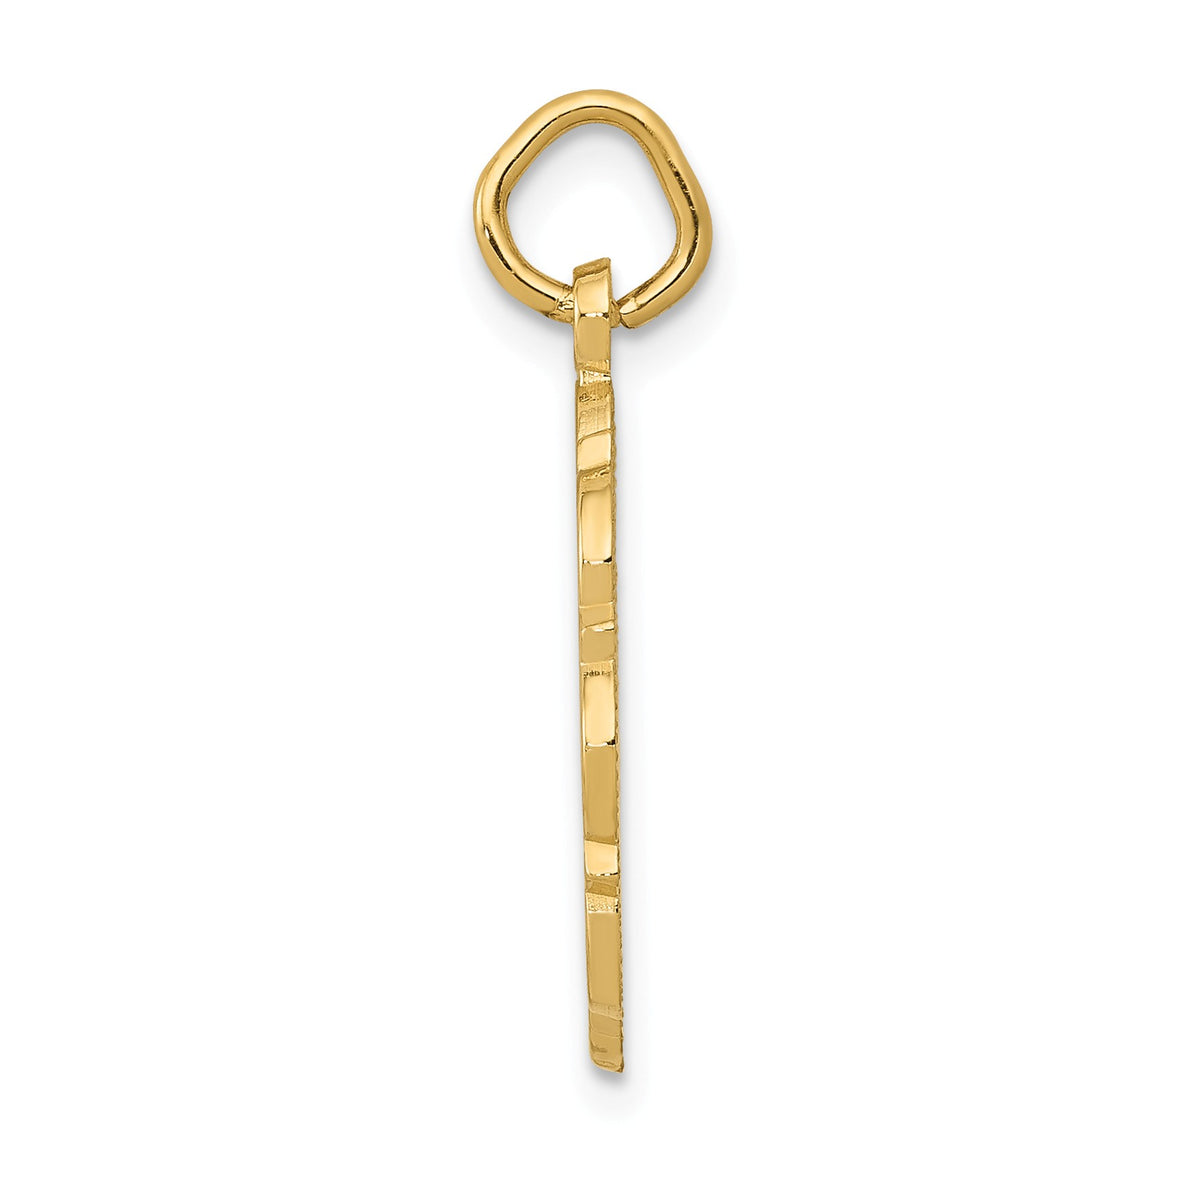 Alternate view of the 14k Yellow Gold Registered Nurse Disk Charm, 16mm by The Black Bow Jewelry Co.